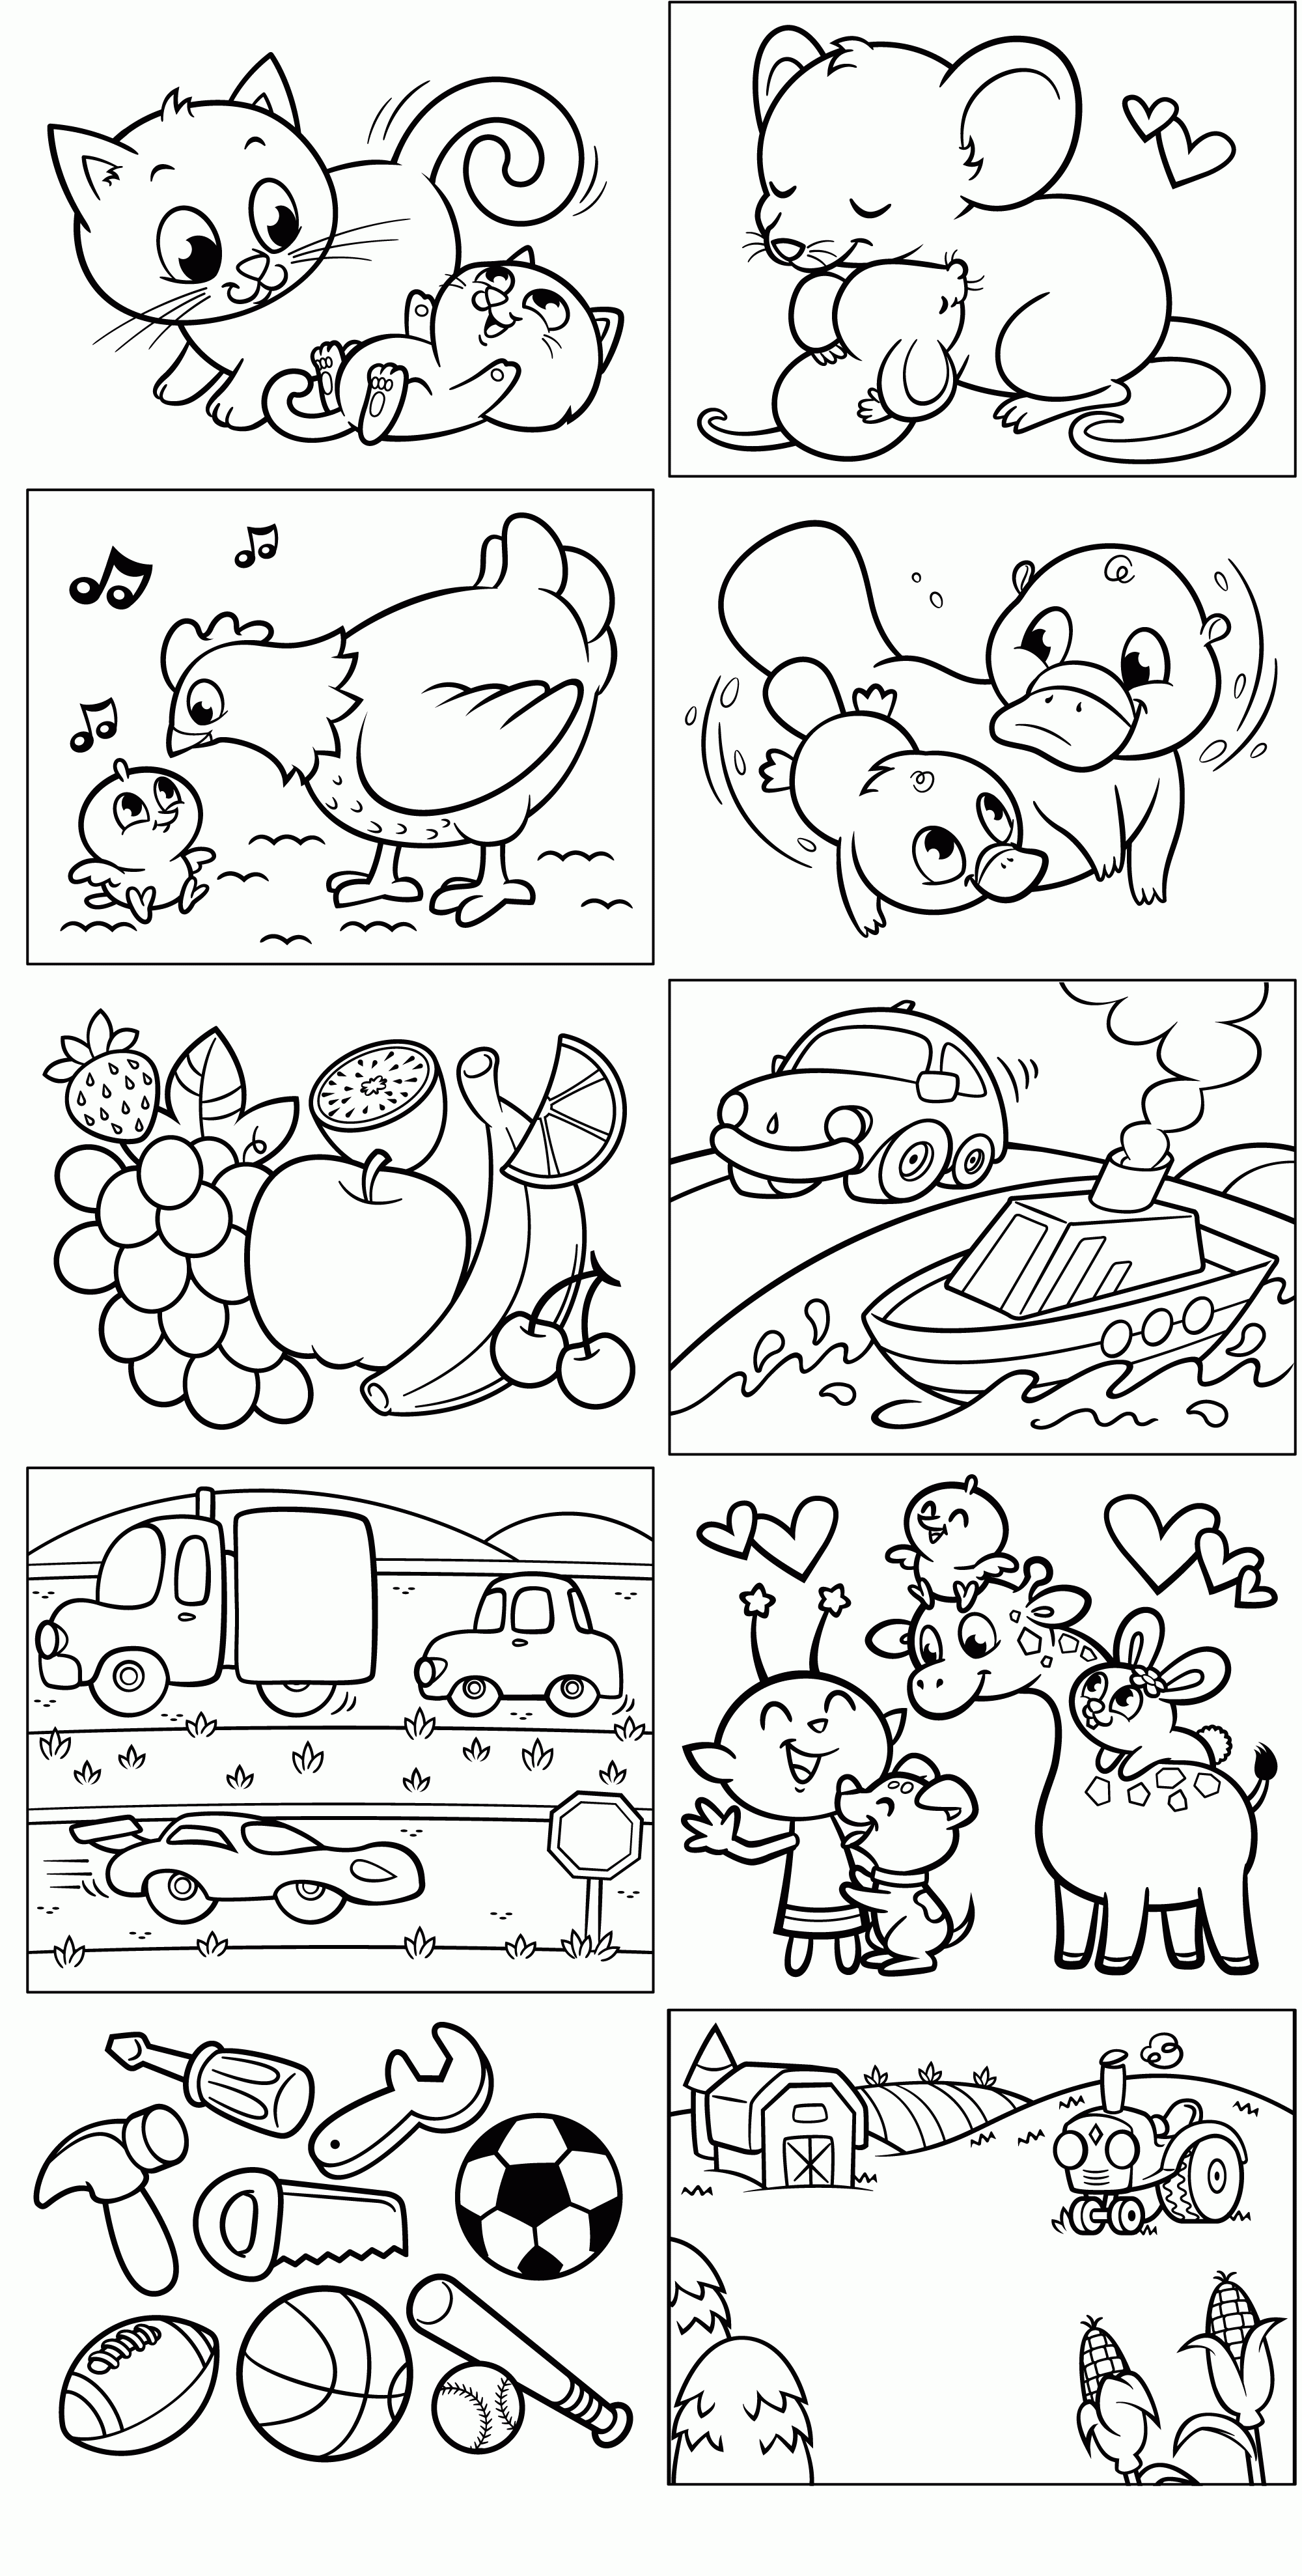 Animal Opposites Coloring Pages - Coloring Page